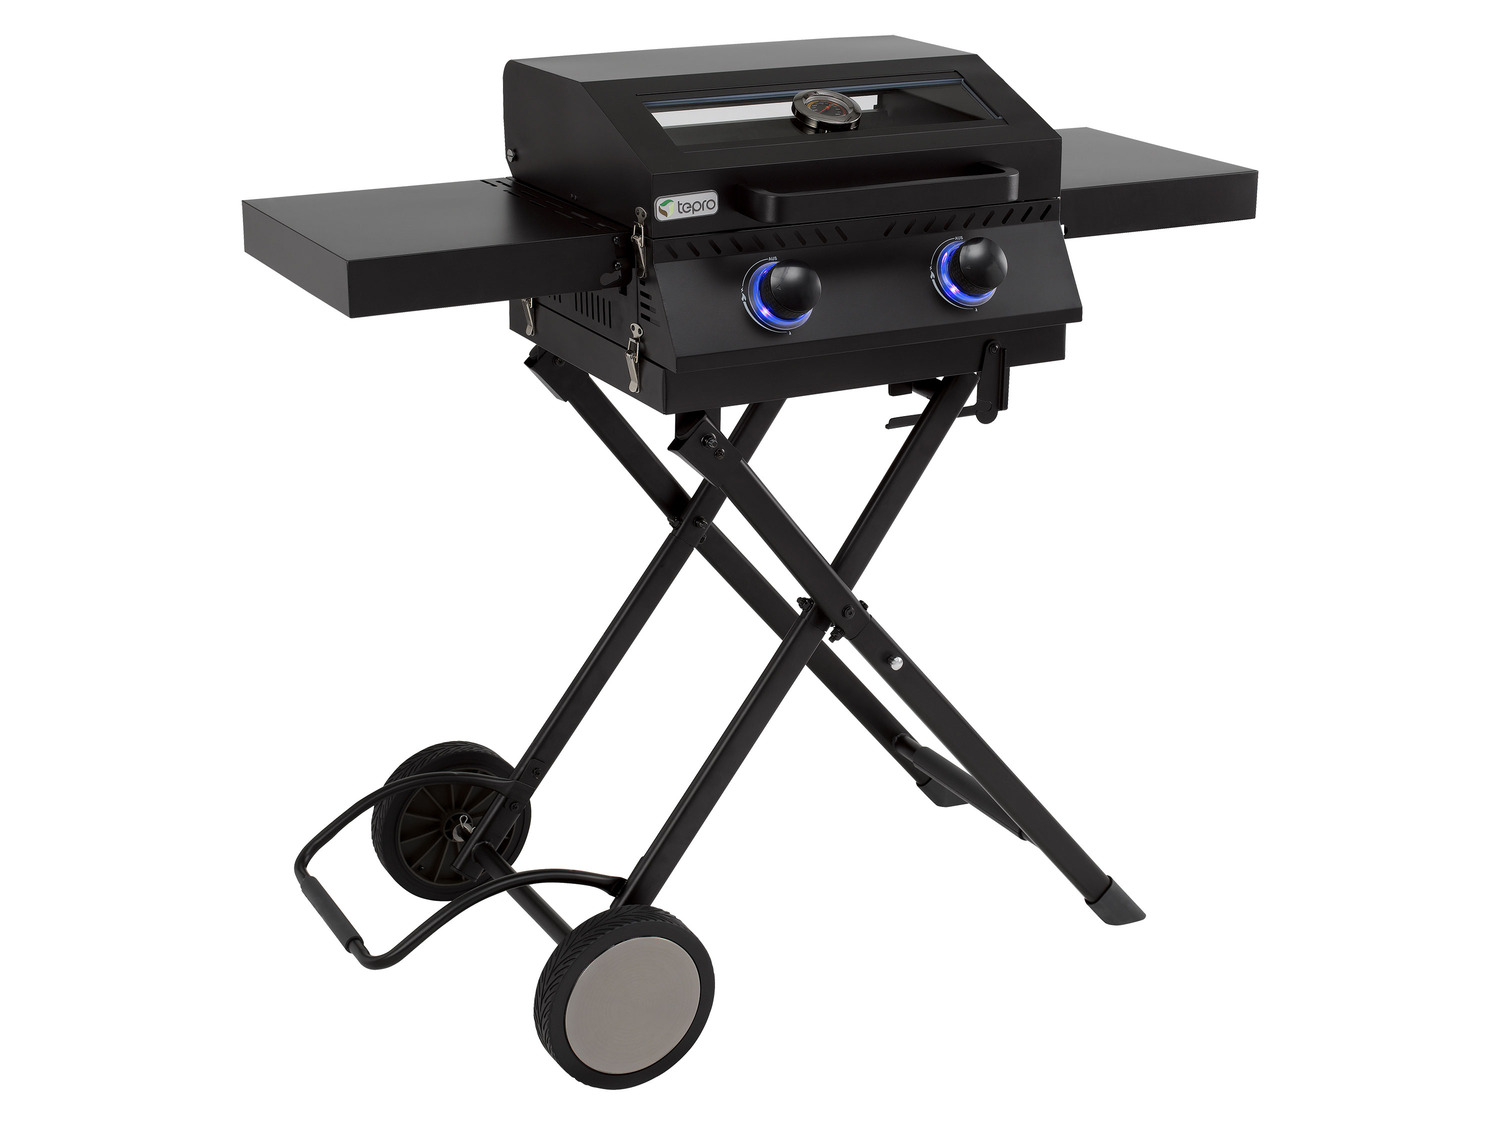 6… Brenner, »Chicago« Special tepro 2 Gasgrill Edition,